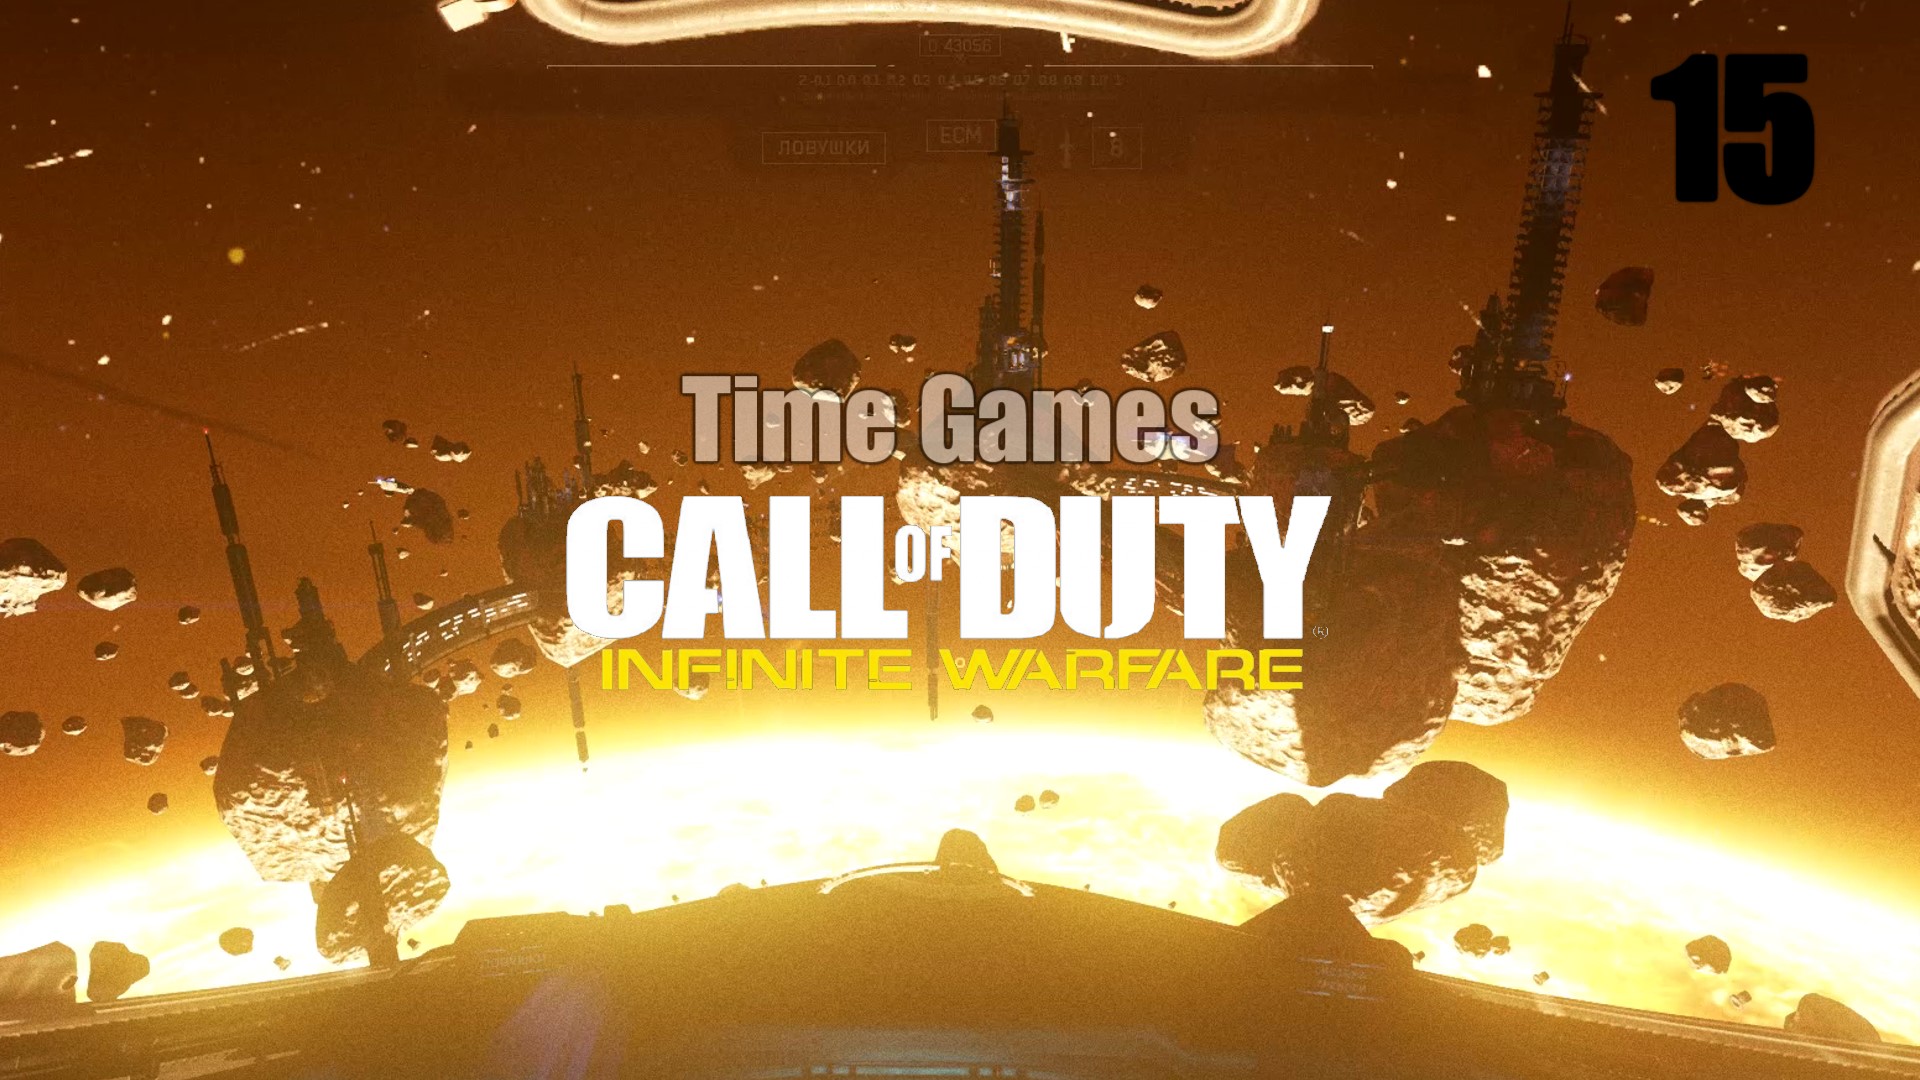 Game time. Call of Duty next 15. Time it game. Операция 15 минут